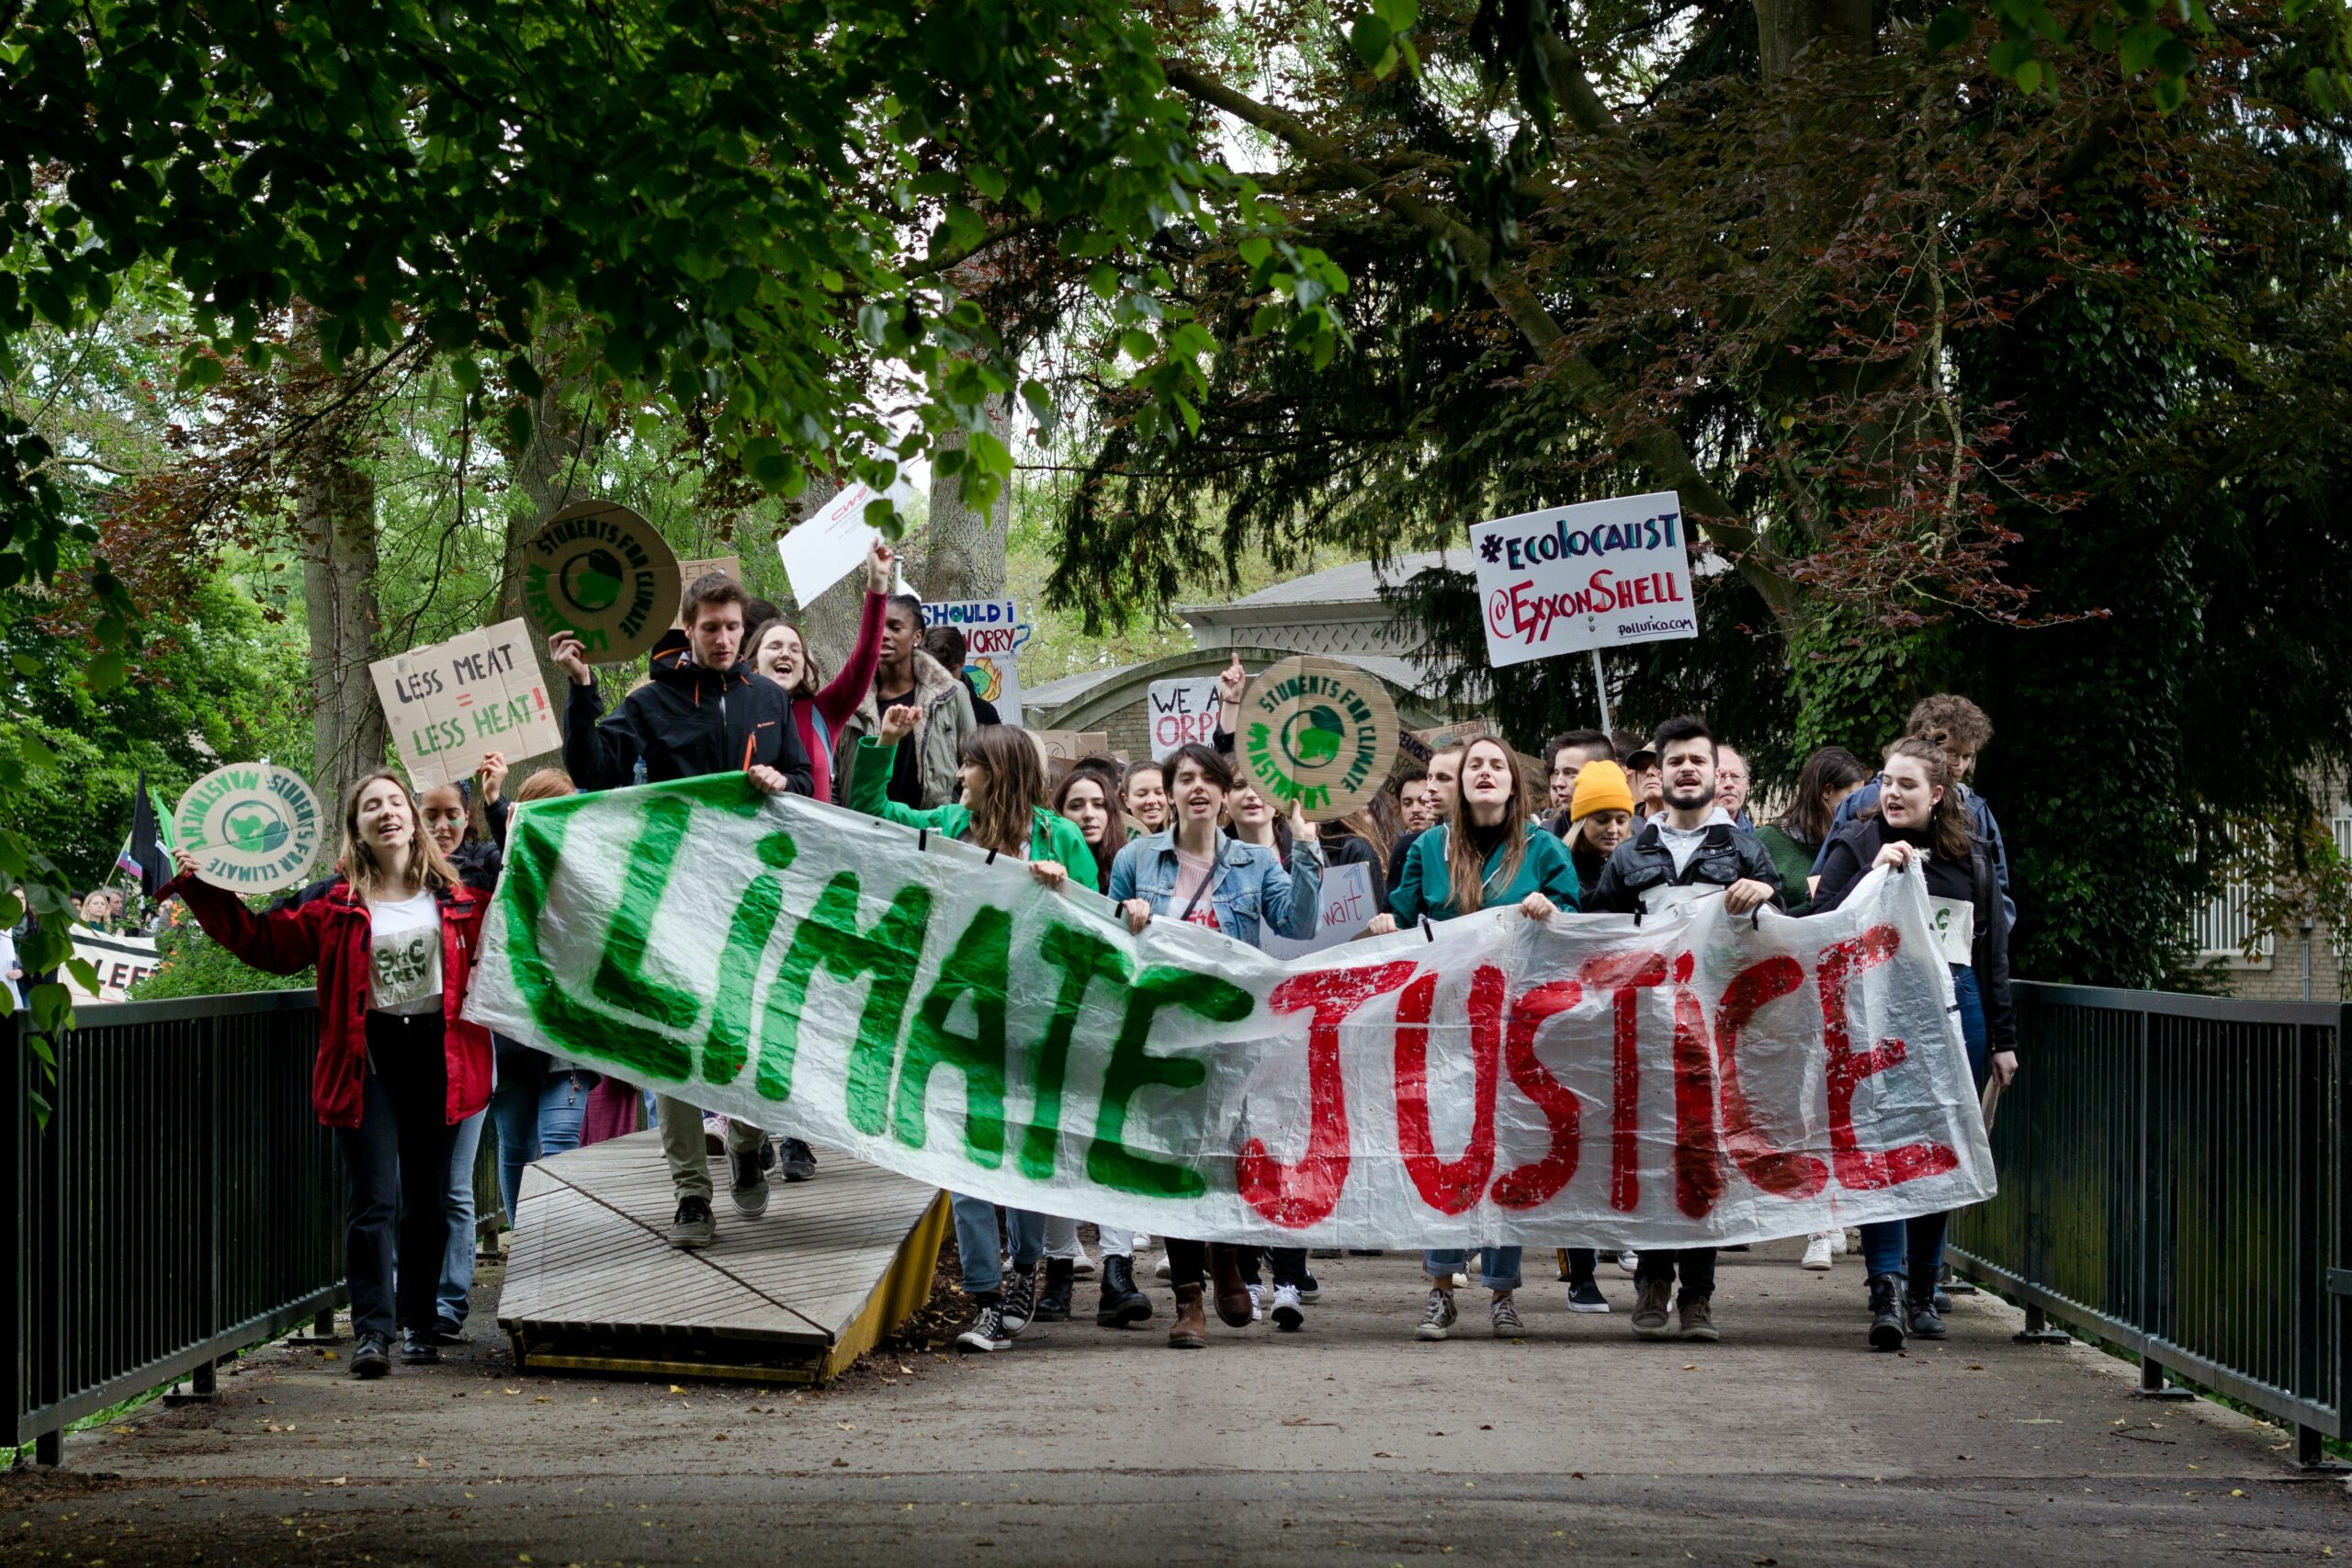 A banner reading “climate justice” at a youth climate rally